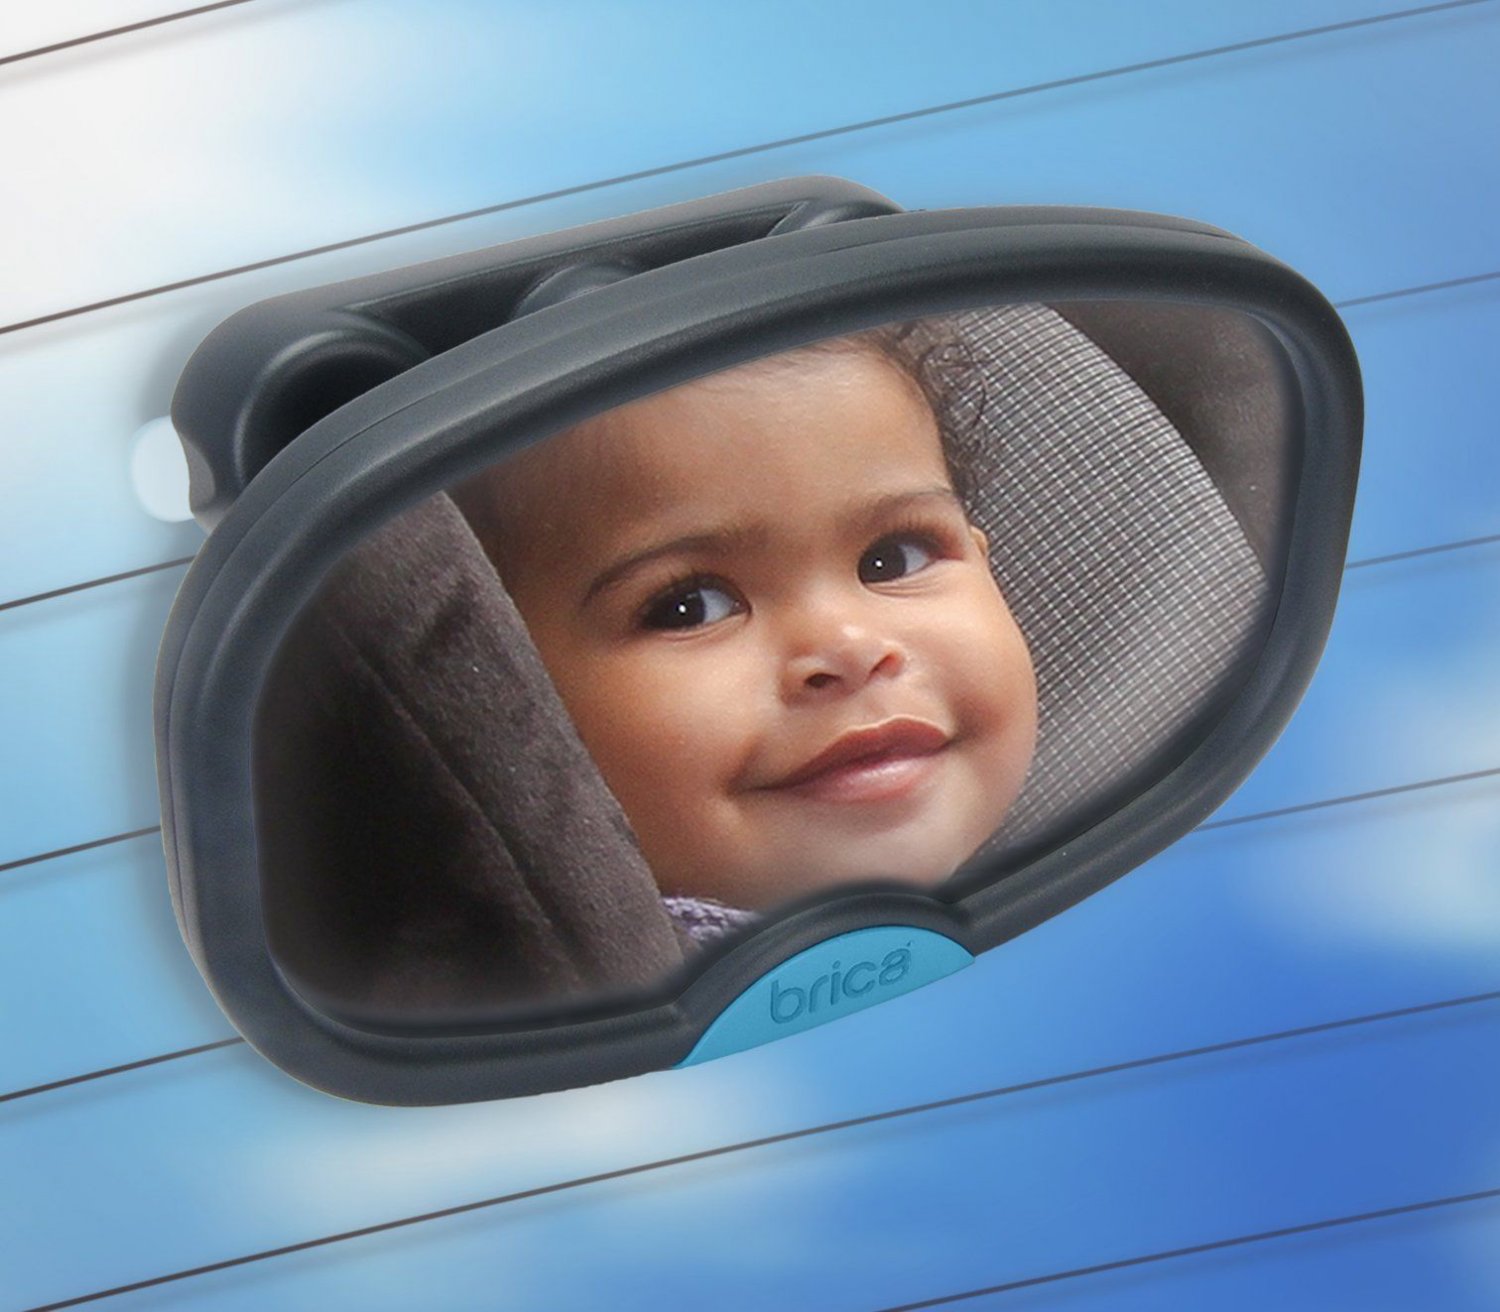 Deluxe Baby Mirror In Car Safety Child Monitoring Back Seat Rear View